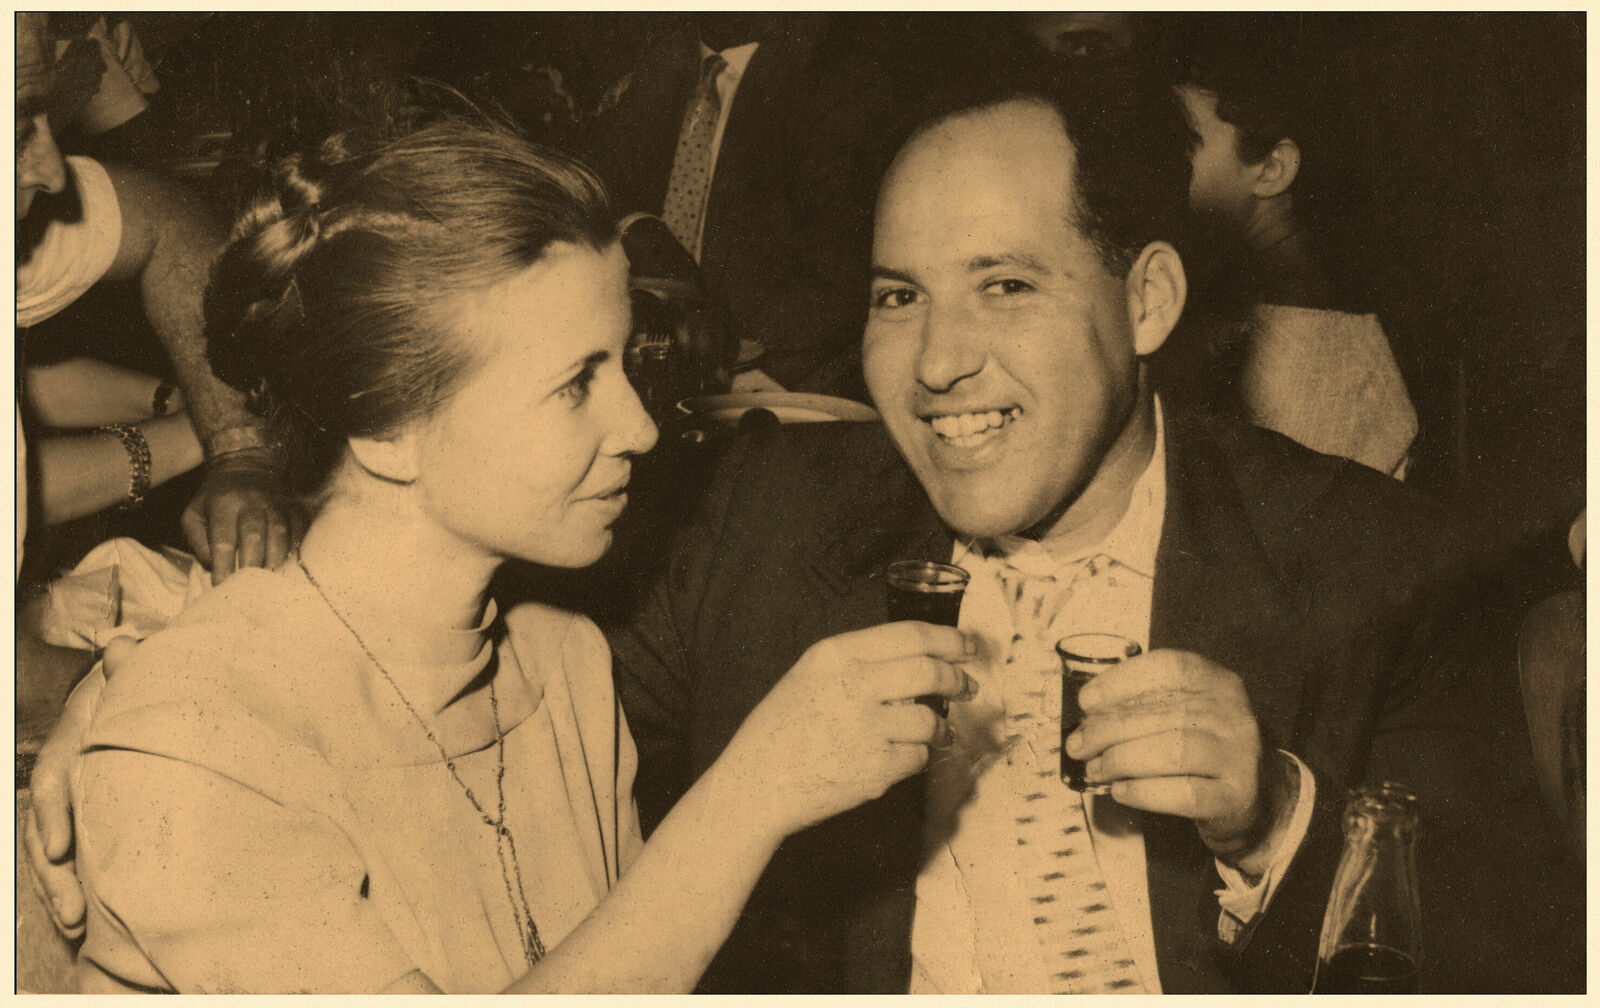 Sally Perel with his wife Dvora (1959)